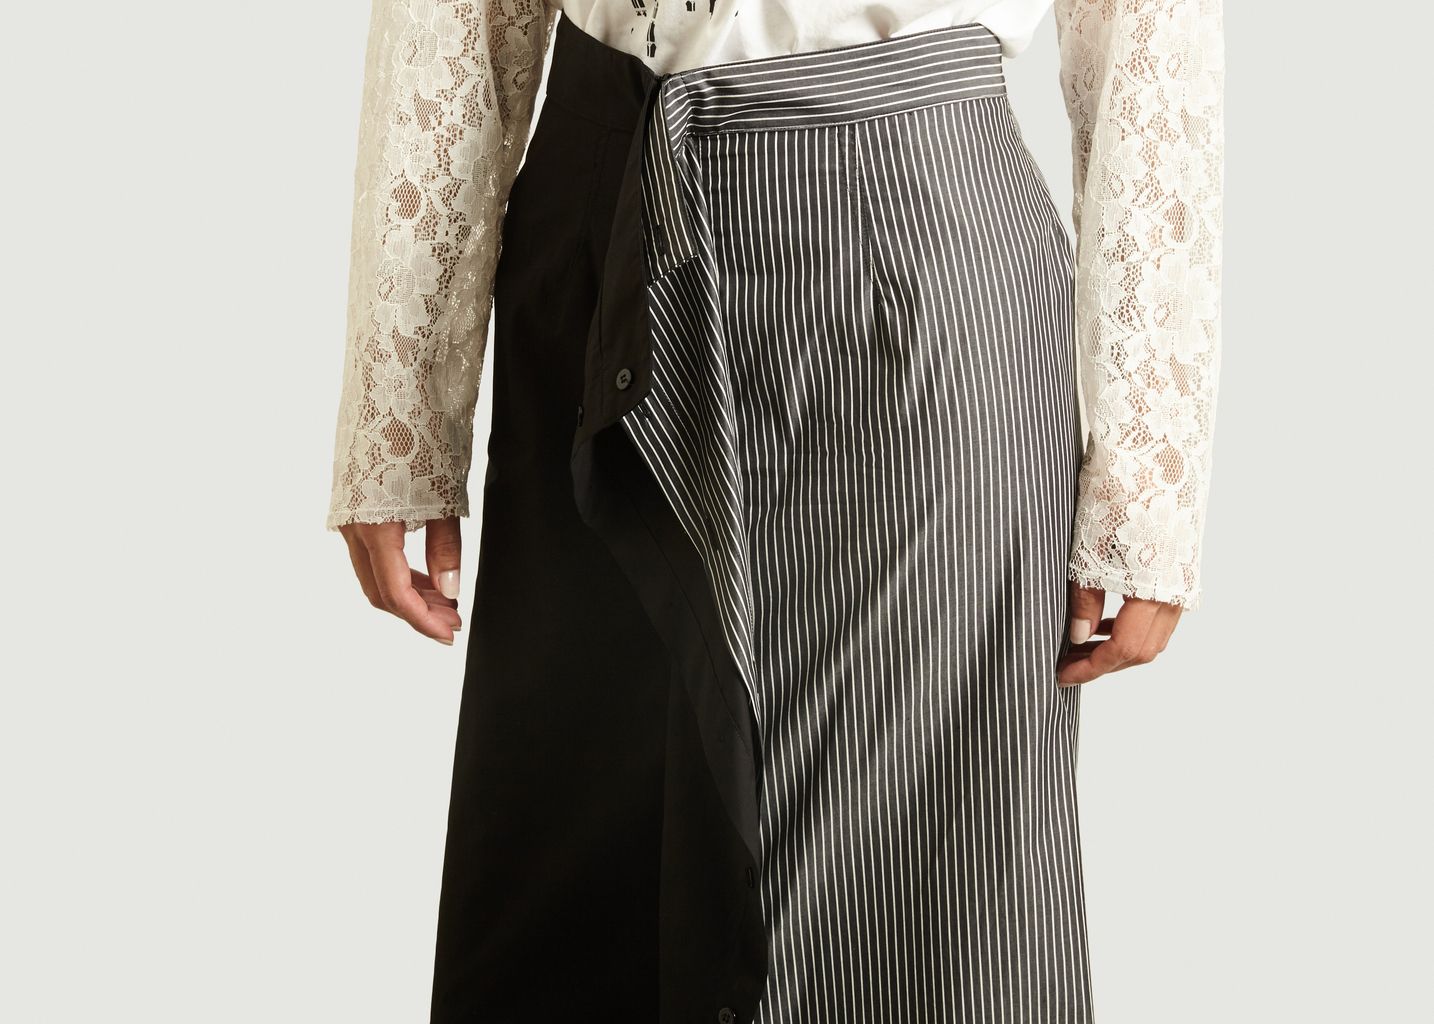 Printed double skirt with zipper closure  - MM6 Maison Margiela